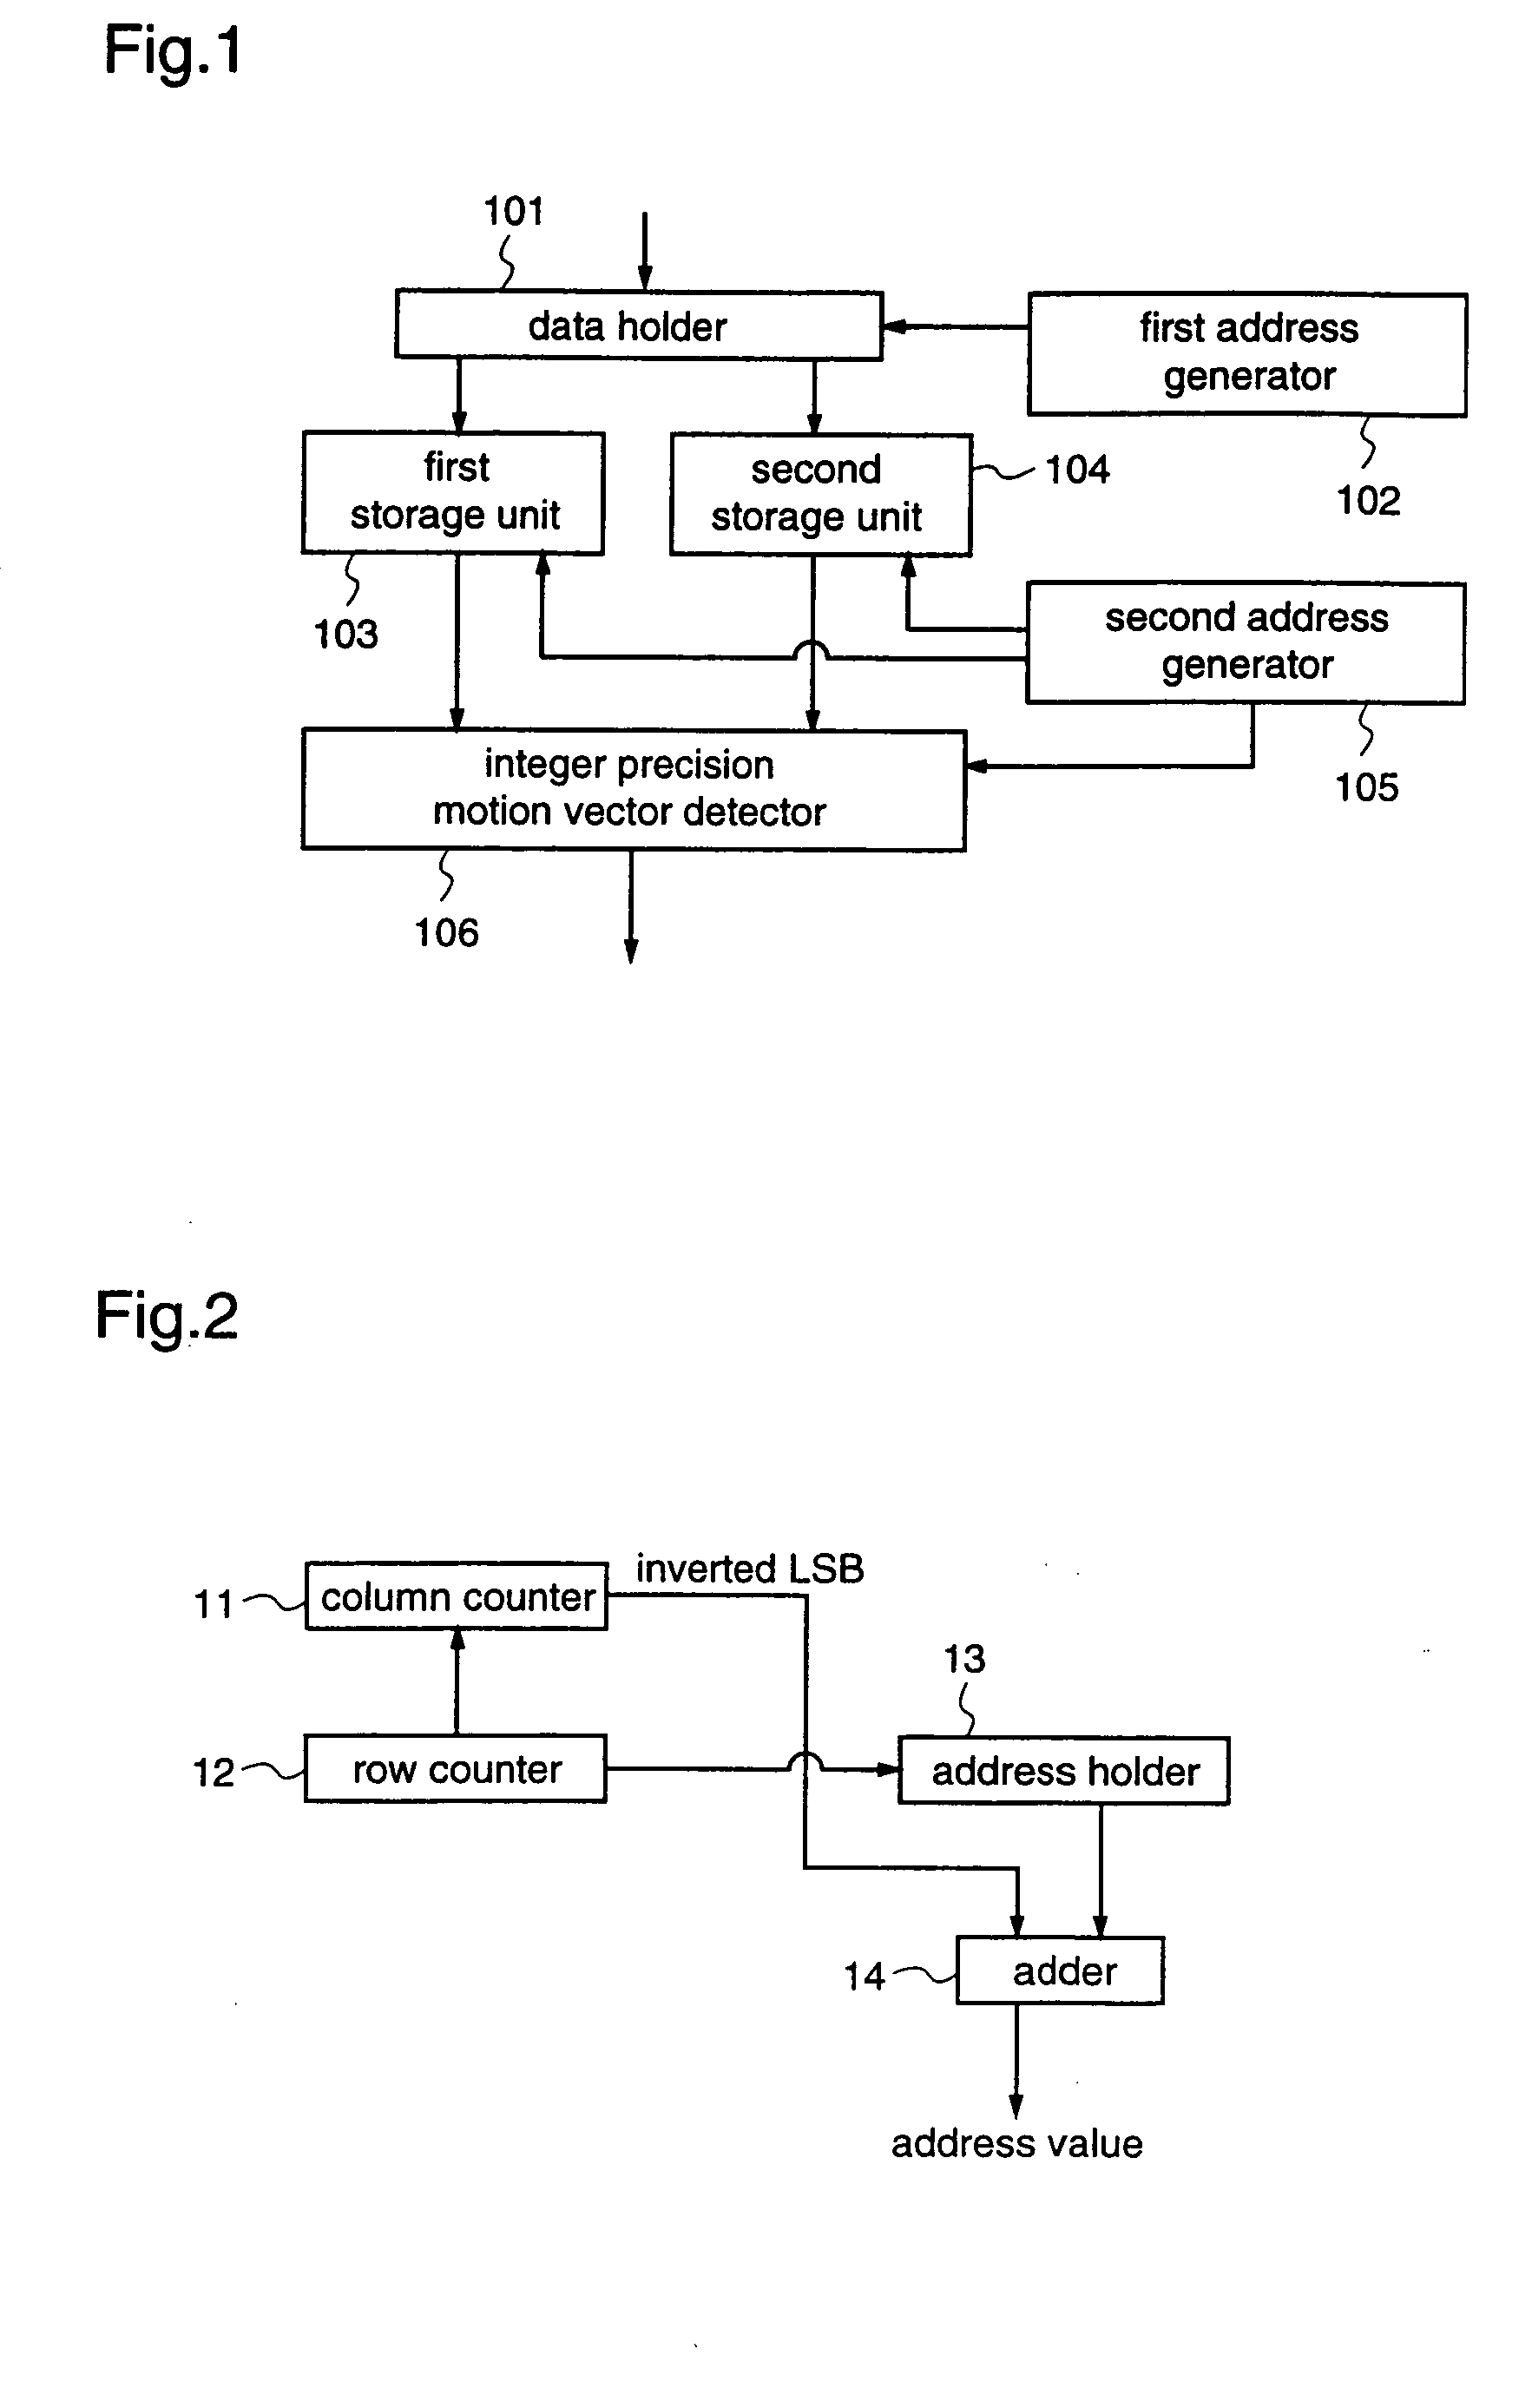 Motion vector detection apparatus for performing checker-pattern subsampling with respect to pixel arrays